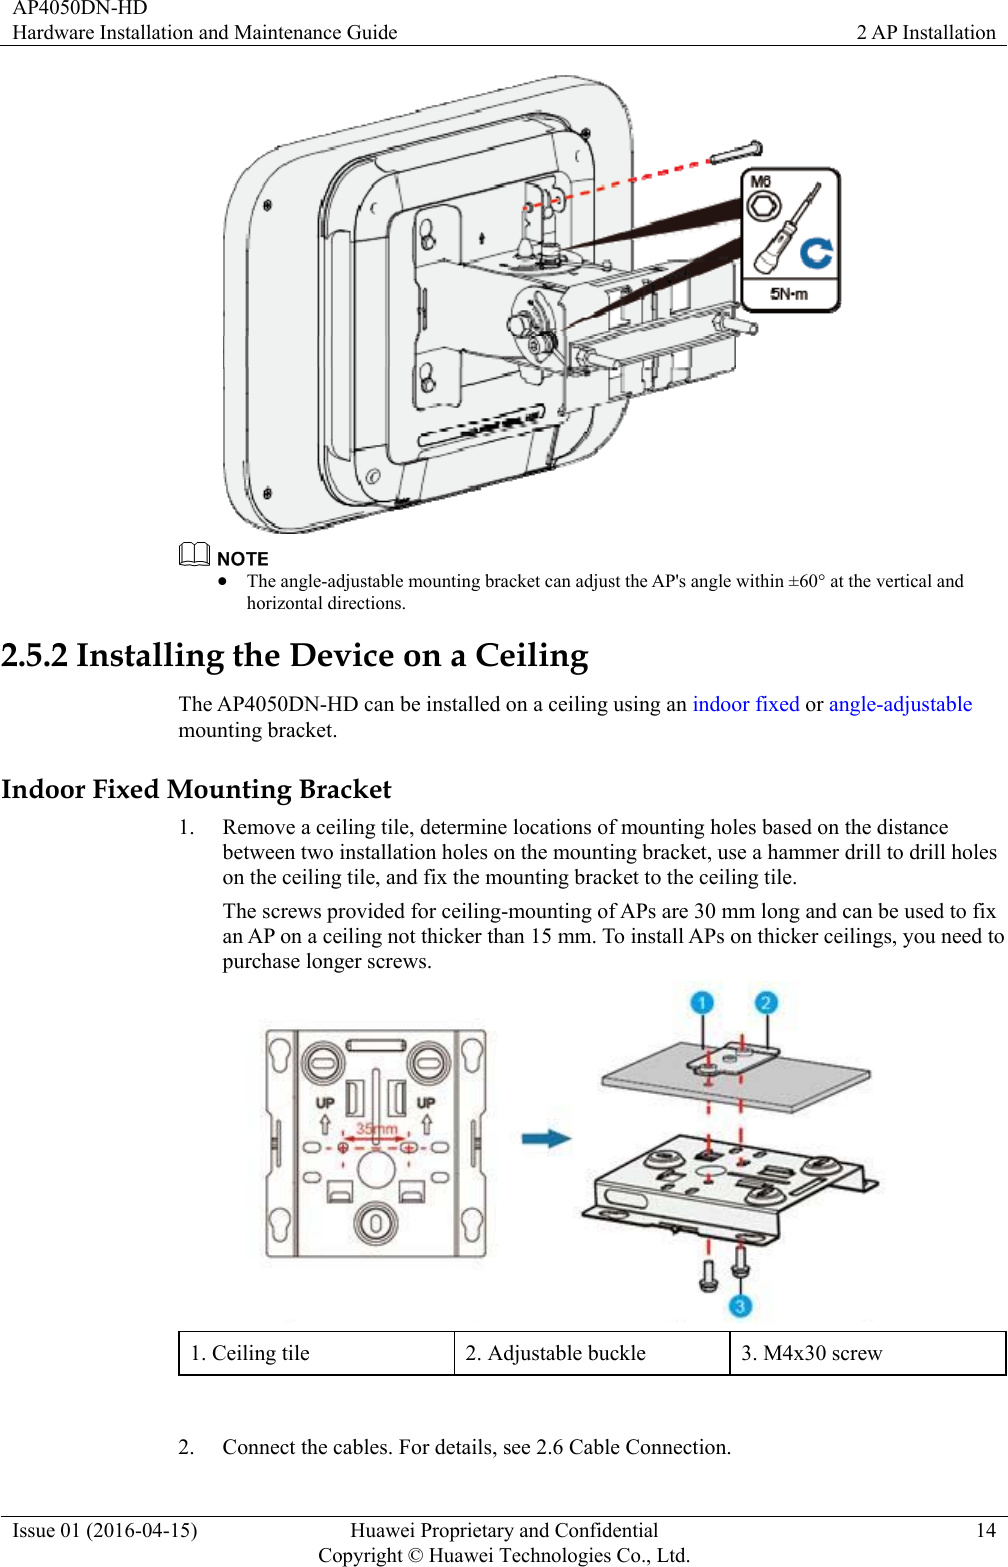 AP4050DN-HD Hardware Installation and Maintenance Guide  2 AP Installation Issue 01 (2016-04-15)  Huawei Proprietary and Confidential         Copyright © Huawei Technologies Co., Ltd.14    The angle-adjustable mounting bracket can adjust the AP&apos;s angle within ±60° at the vertical and horizontal directions. 2.5.2 Installing the Device on a Ceiling The AP4050DN-HD can be installed on a ceiling using an indoor fixed or angle-adjustable mounting bracket. Indoor Fixed Mounting Bracket 1. Remove a ceiling tile, determine locations of mounting holes based on the distance between two installation holes on the mounting bracket, use a hammer drill to drill holes on the ceiling tile, and fix the mounting bracket to the ceiling tile. The screws provided for ceiling-mounting of APs are 30 mm long and can be used to fix an AP on a ceiling not thicker than 15 mm. To install APs on thicker ceilings, you need to purchase longer screws.    1. Ceiling tile  2. Adjustable buckle  3. M4x30 screw  2. Connect the cables. For details, see 2.6 Cable Connection. 